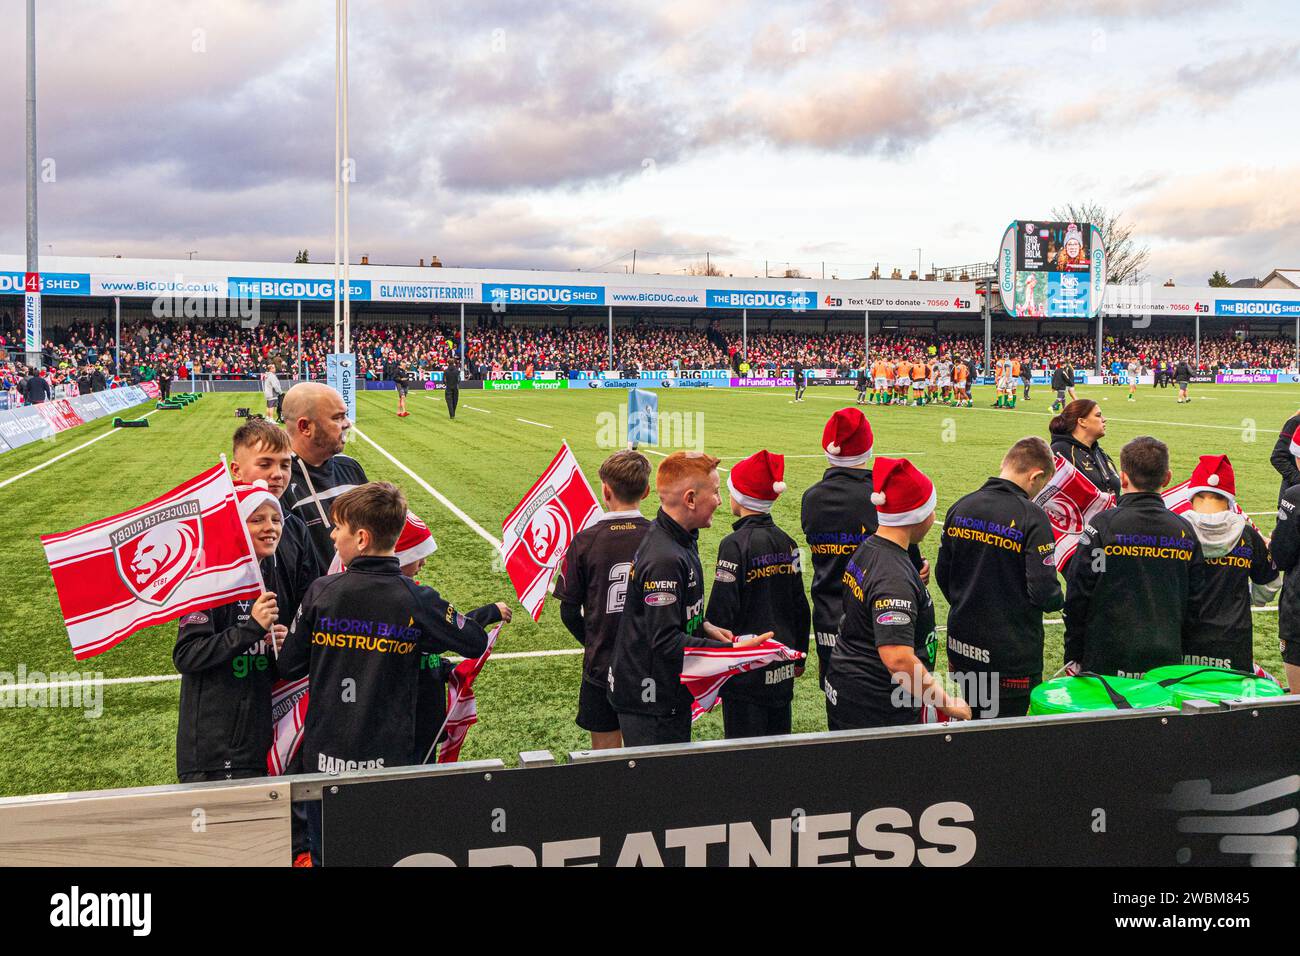 The BigDug 'Shed' (covered terrace) at Kingsholm Stadium, home of Gloucester Rugby, before the match with Northampton on 23/12/2023 Gloucester, UK Stock Photo